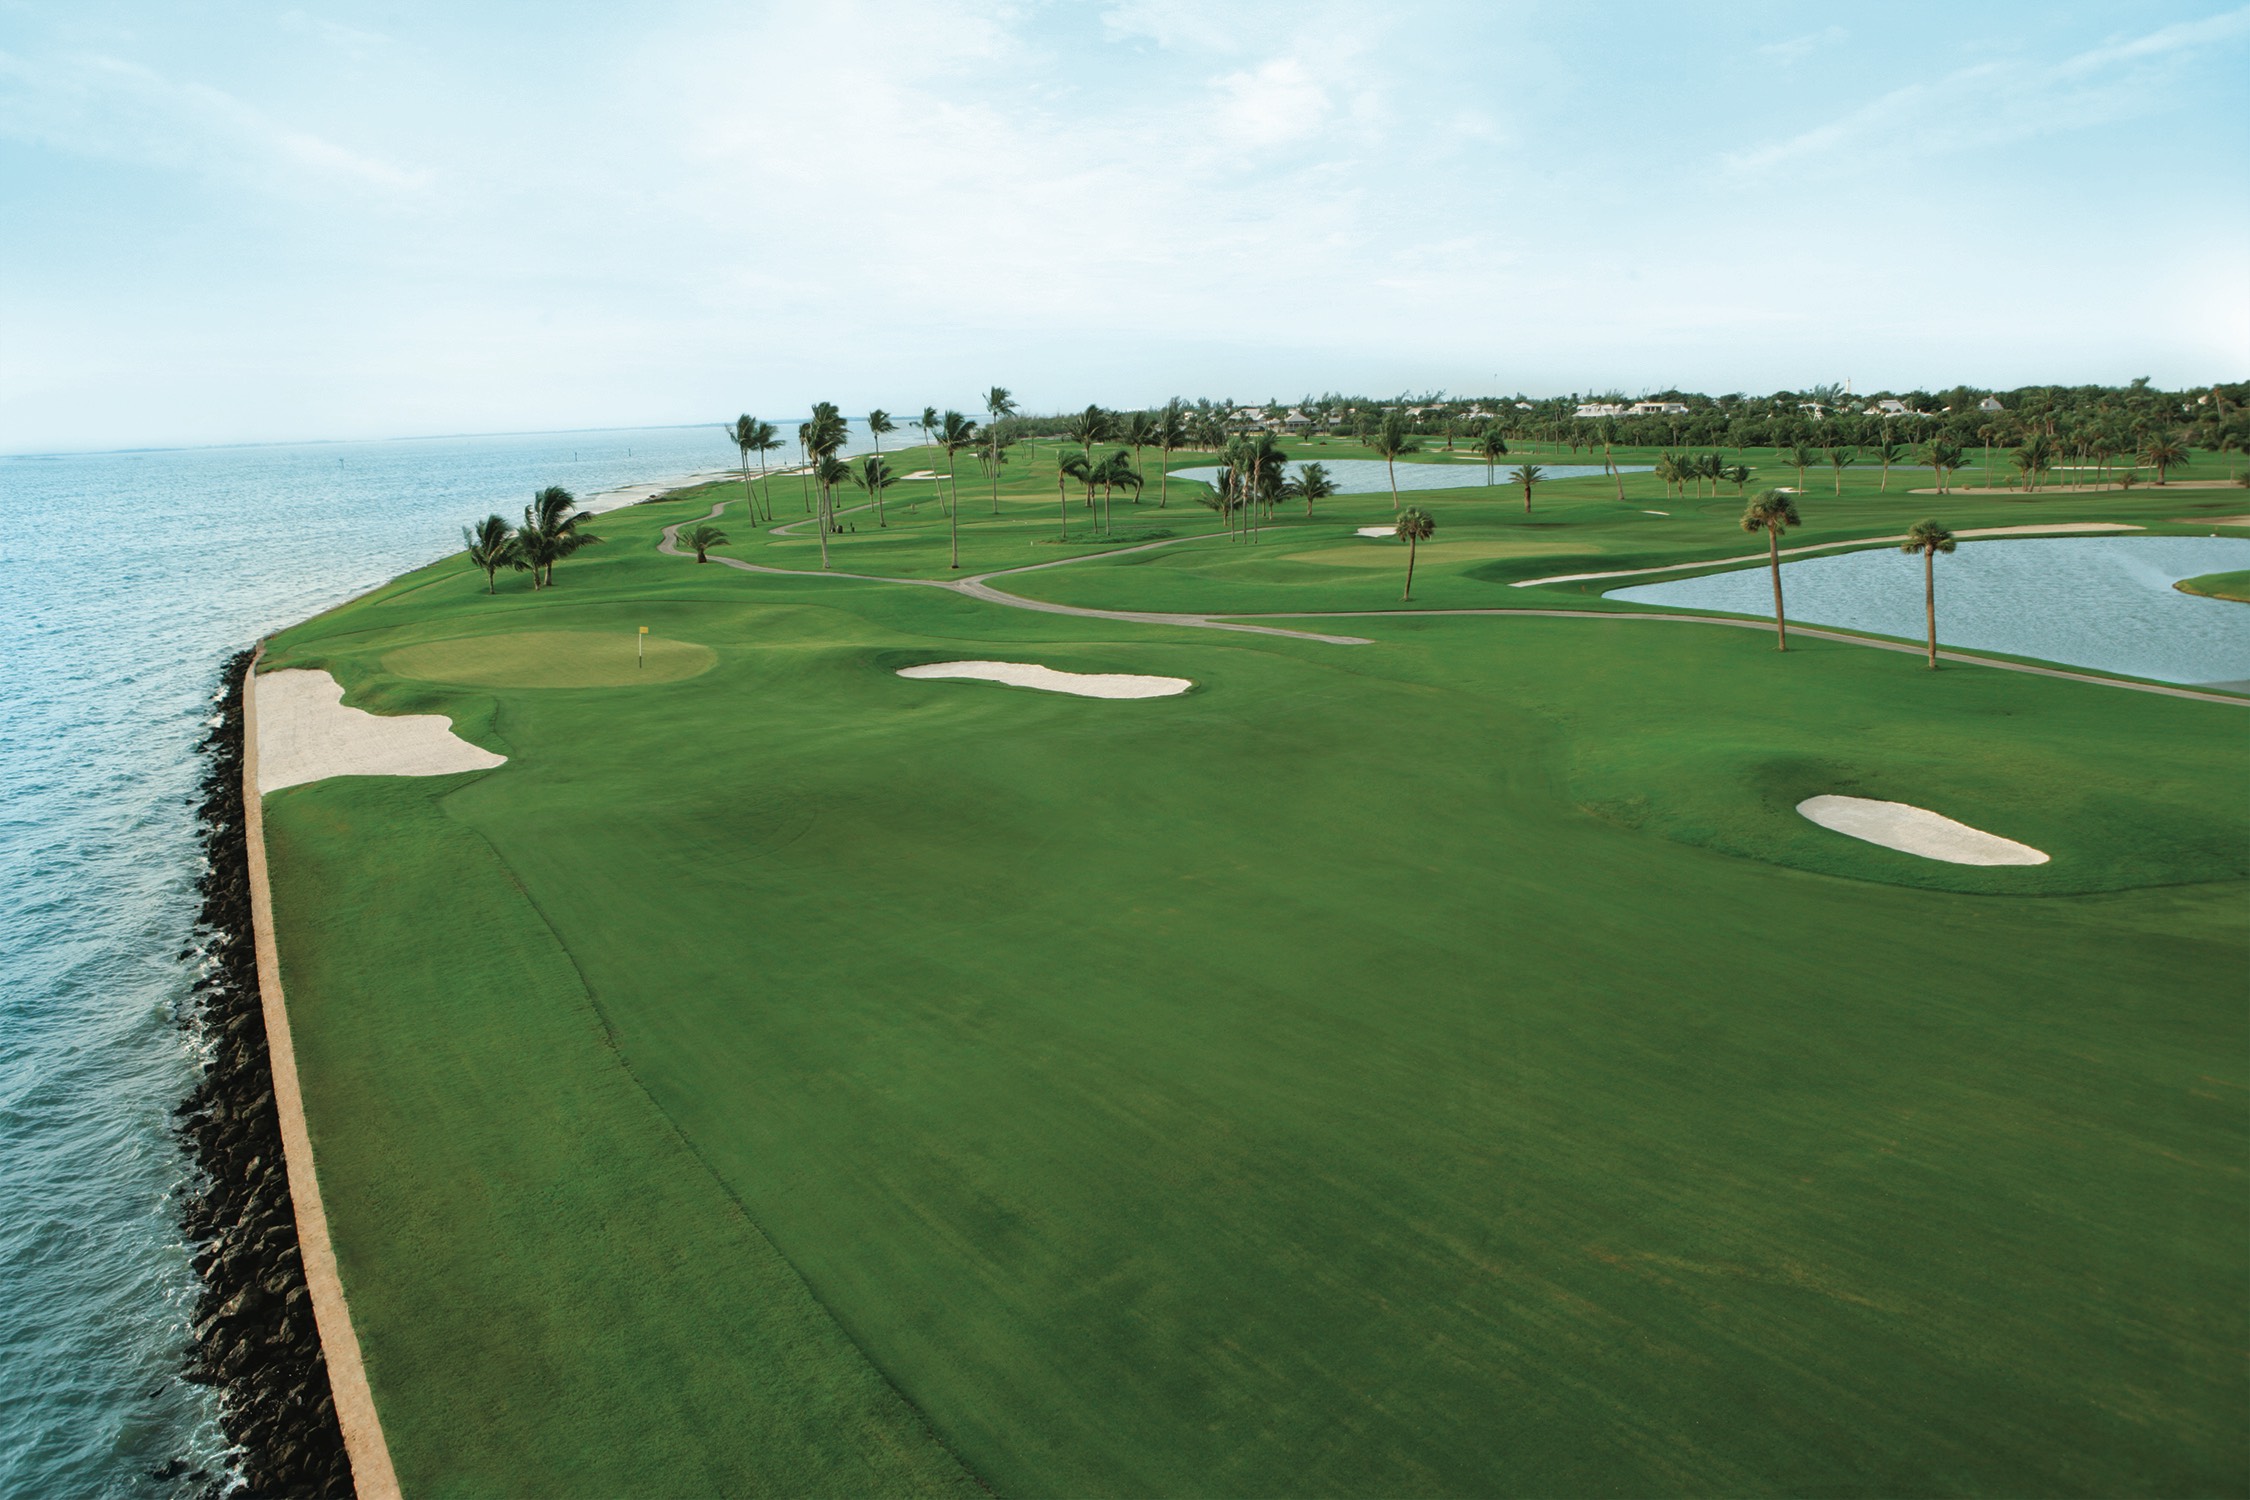 The Gasparilla Inn & Club's 2020 Experience Package offers guests a wide variety of unique Gasparilla Island activities, including 18 holes of golf on the Pete Dye Championship Golf Course.